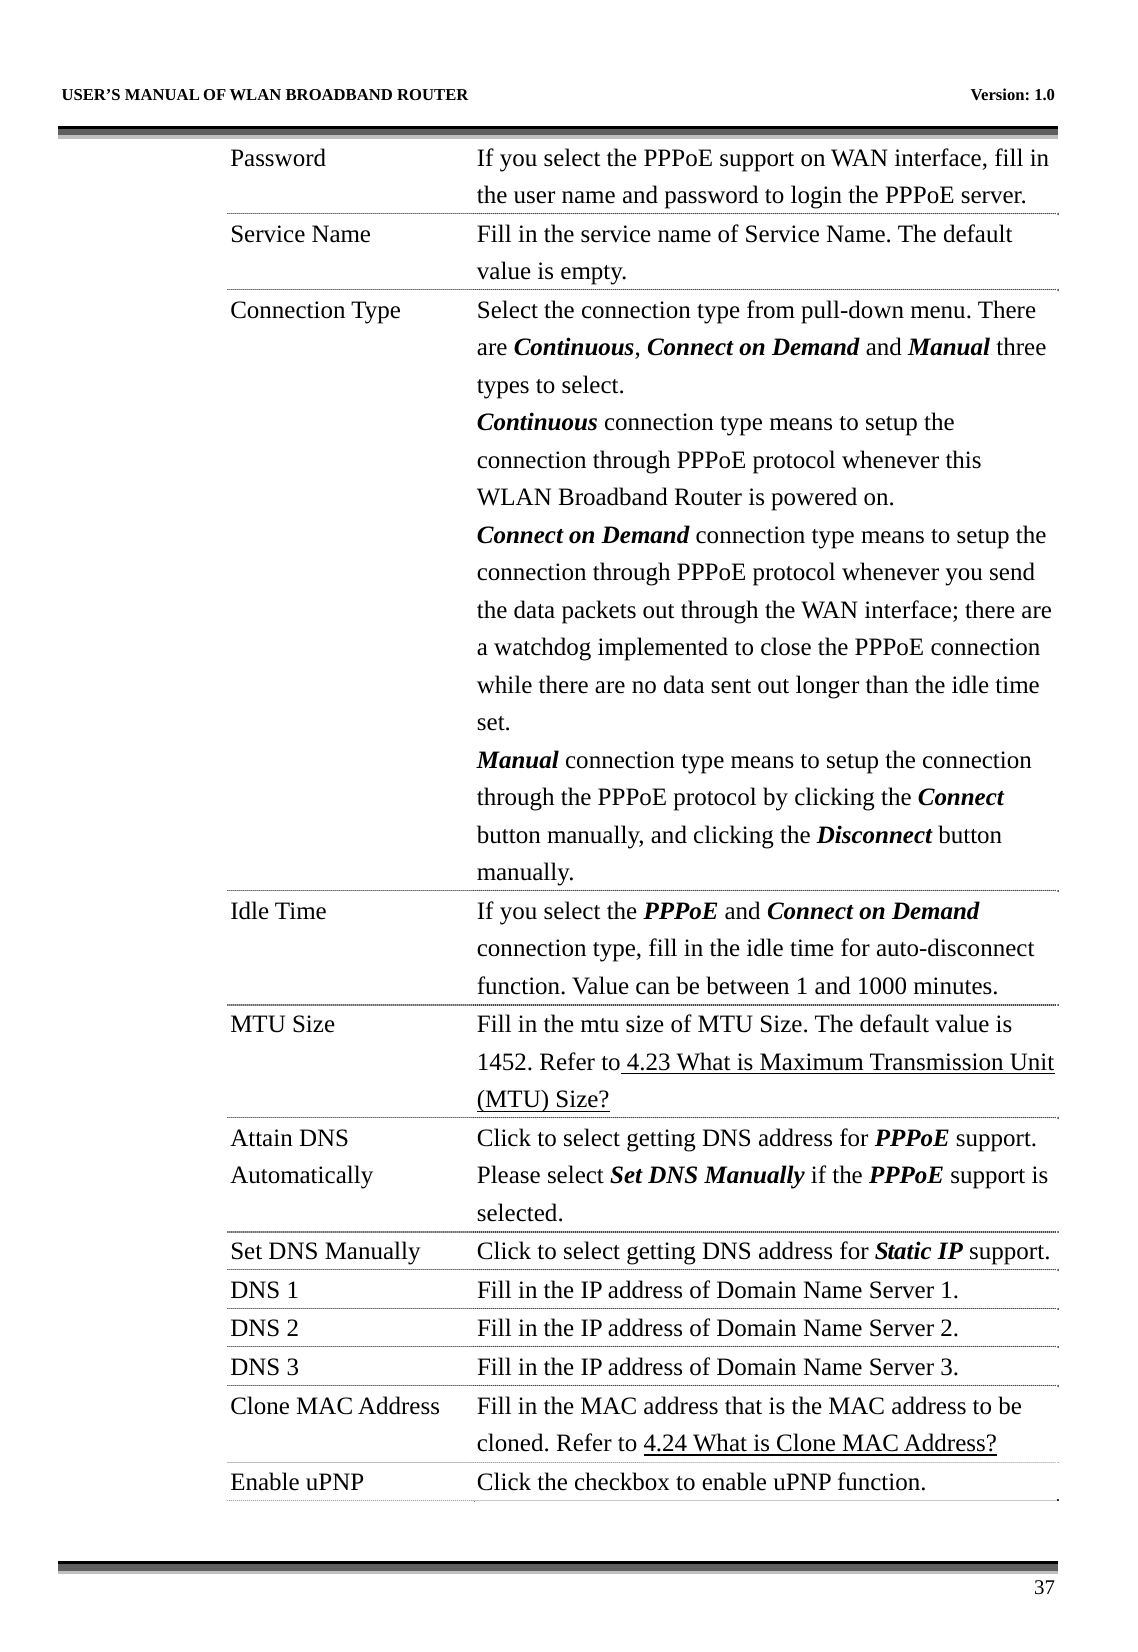   USER’S MANUAL OF WLAN BROADBAND ROUTER    Version: 1.0      37 Password  If you select the PPPoE support on WAN interface, fill in the user name and password to login the PPPoE server. Service Name  Fill in the service name of Service Name. The default value is empty. Connection Type  Select the connection type from pull-down menu. There are Continuous, Connect on Demand and Manual three types to select. Continuous connection type means to setup the connection through PPPoE protocol whenever this WLAN Broadband Router is powered on. Connect on Demand connection type means to setup the connection through PPPoE protocol whenever you send the data packets out through the WAN interface; there are a watchdog implemented to close the PPPoE connection while there are no data sent out longer than the idle time set. Manual connection type means to setup the connection through the PPPoE protocol by clicking the Connect button manually, and clicking the Disconnect button manually. Idle Time  If you select the PPPoE and Connect on Demand connection type, fill in the idle time for auto-disconnect function. Value can be between 1 and 1000 minutes. MTU Size  Fill in the mtu size of MTU Size. The default value is 1452. Refer to 4.23 What is Maximum Transmission Unit (MTU) Size? Attain DNS Automatically Click to select getting DNS address for PPPoE support. Please select Set DNS Manually if the PPPoE support is selected. Set DNS Manually  Click to select getting DNS address for Static IP support.DNS 1  Fill in the IP address of Domain Name Server 1. DNS 2  Fill in the IP address of Domain Name Server 2. DNS 3  Fill in the IP address of Domain Name Server 3. Clone MAC Address  Fill in the MAC address that is the MAC address to be cloned. Refer to 4.24 What is Clone MAC Address? Enable uPNP  Click the checkbox to enable uPNP function. 